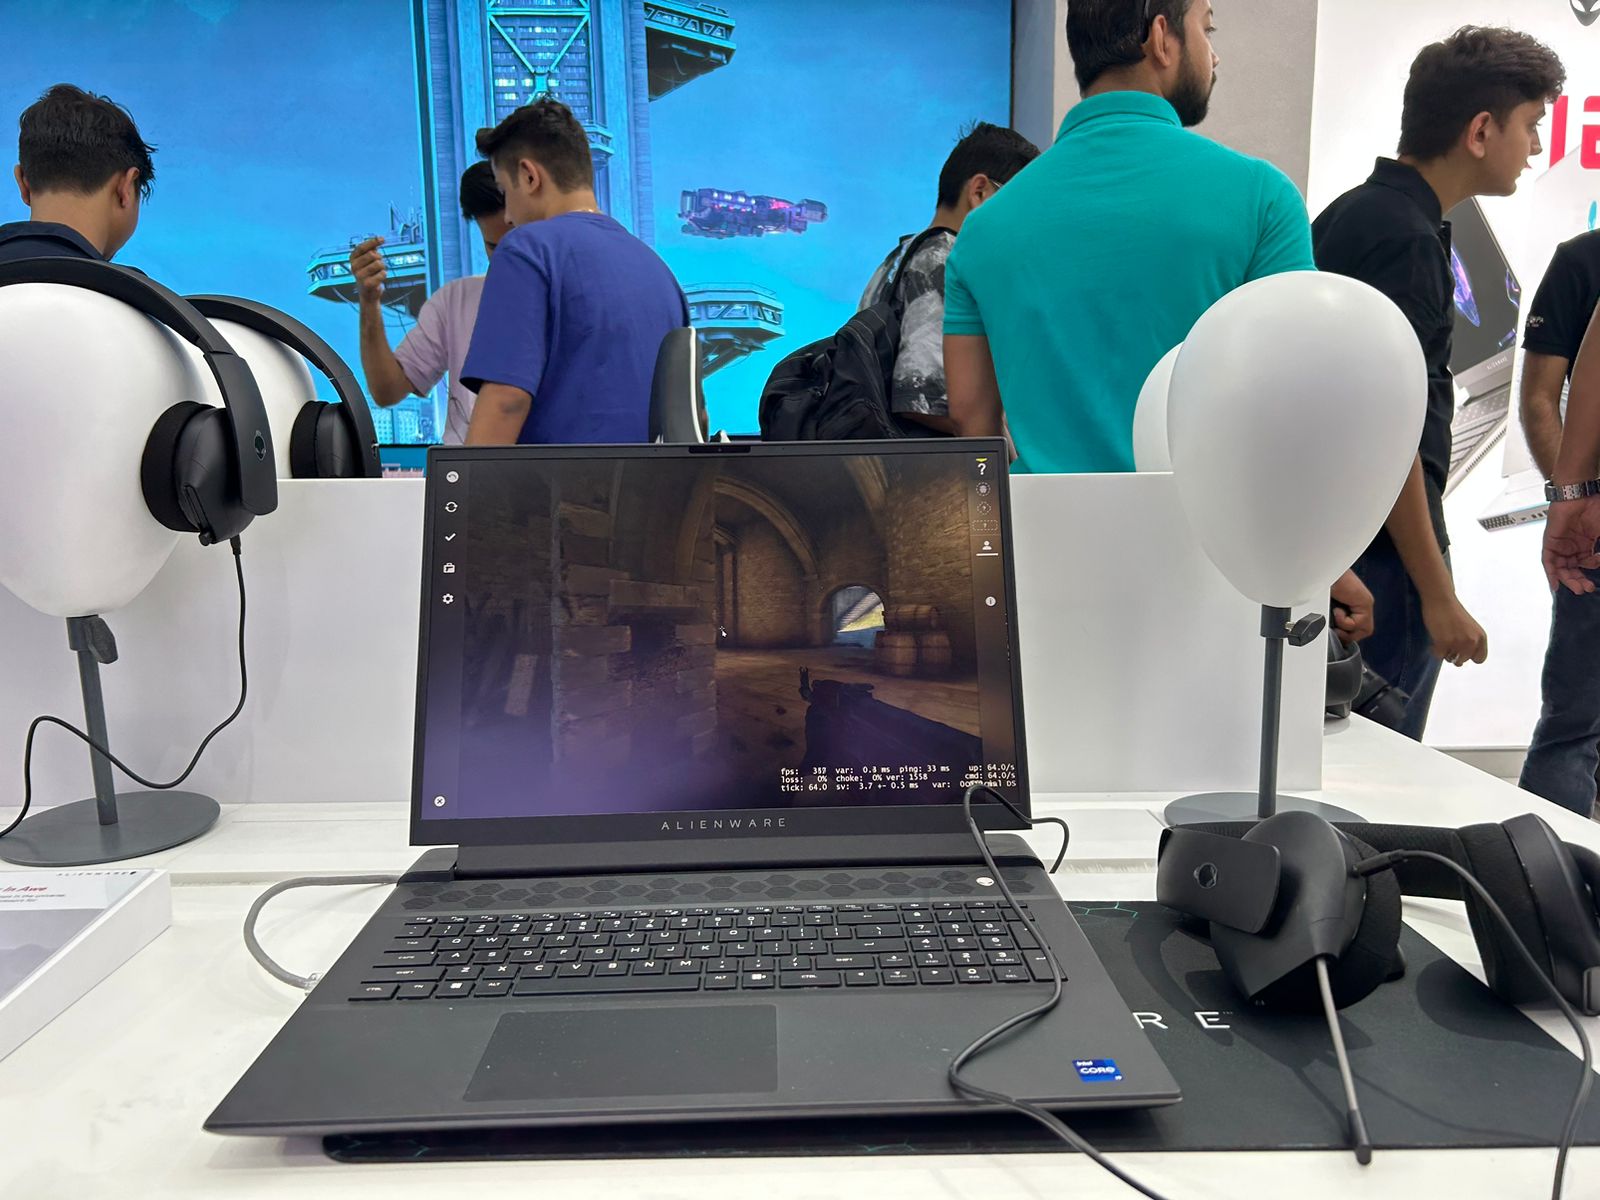 Dell Technologies Alienware Gaming Experience Store Open India New Delhi  Nehru Place